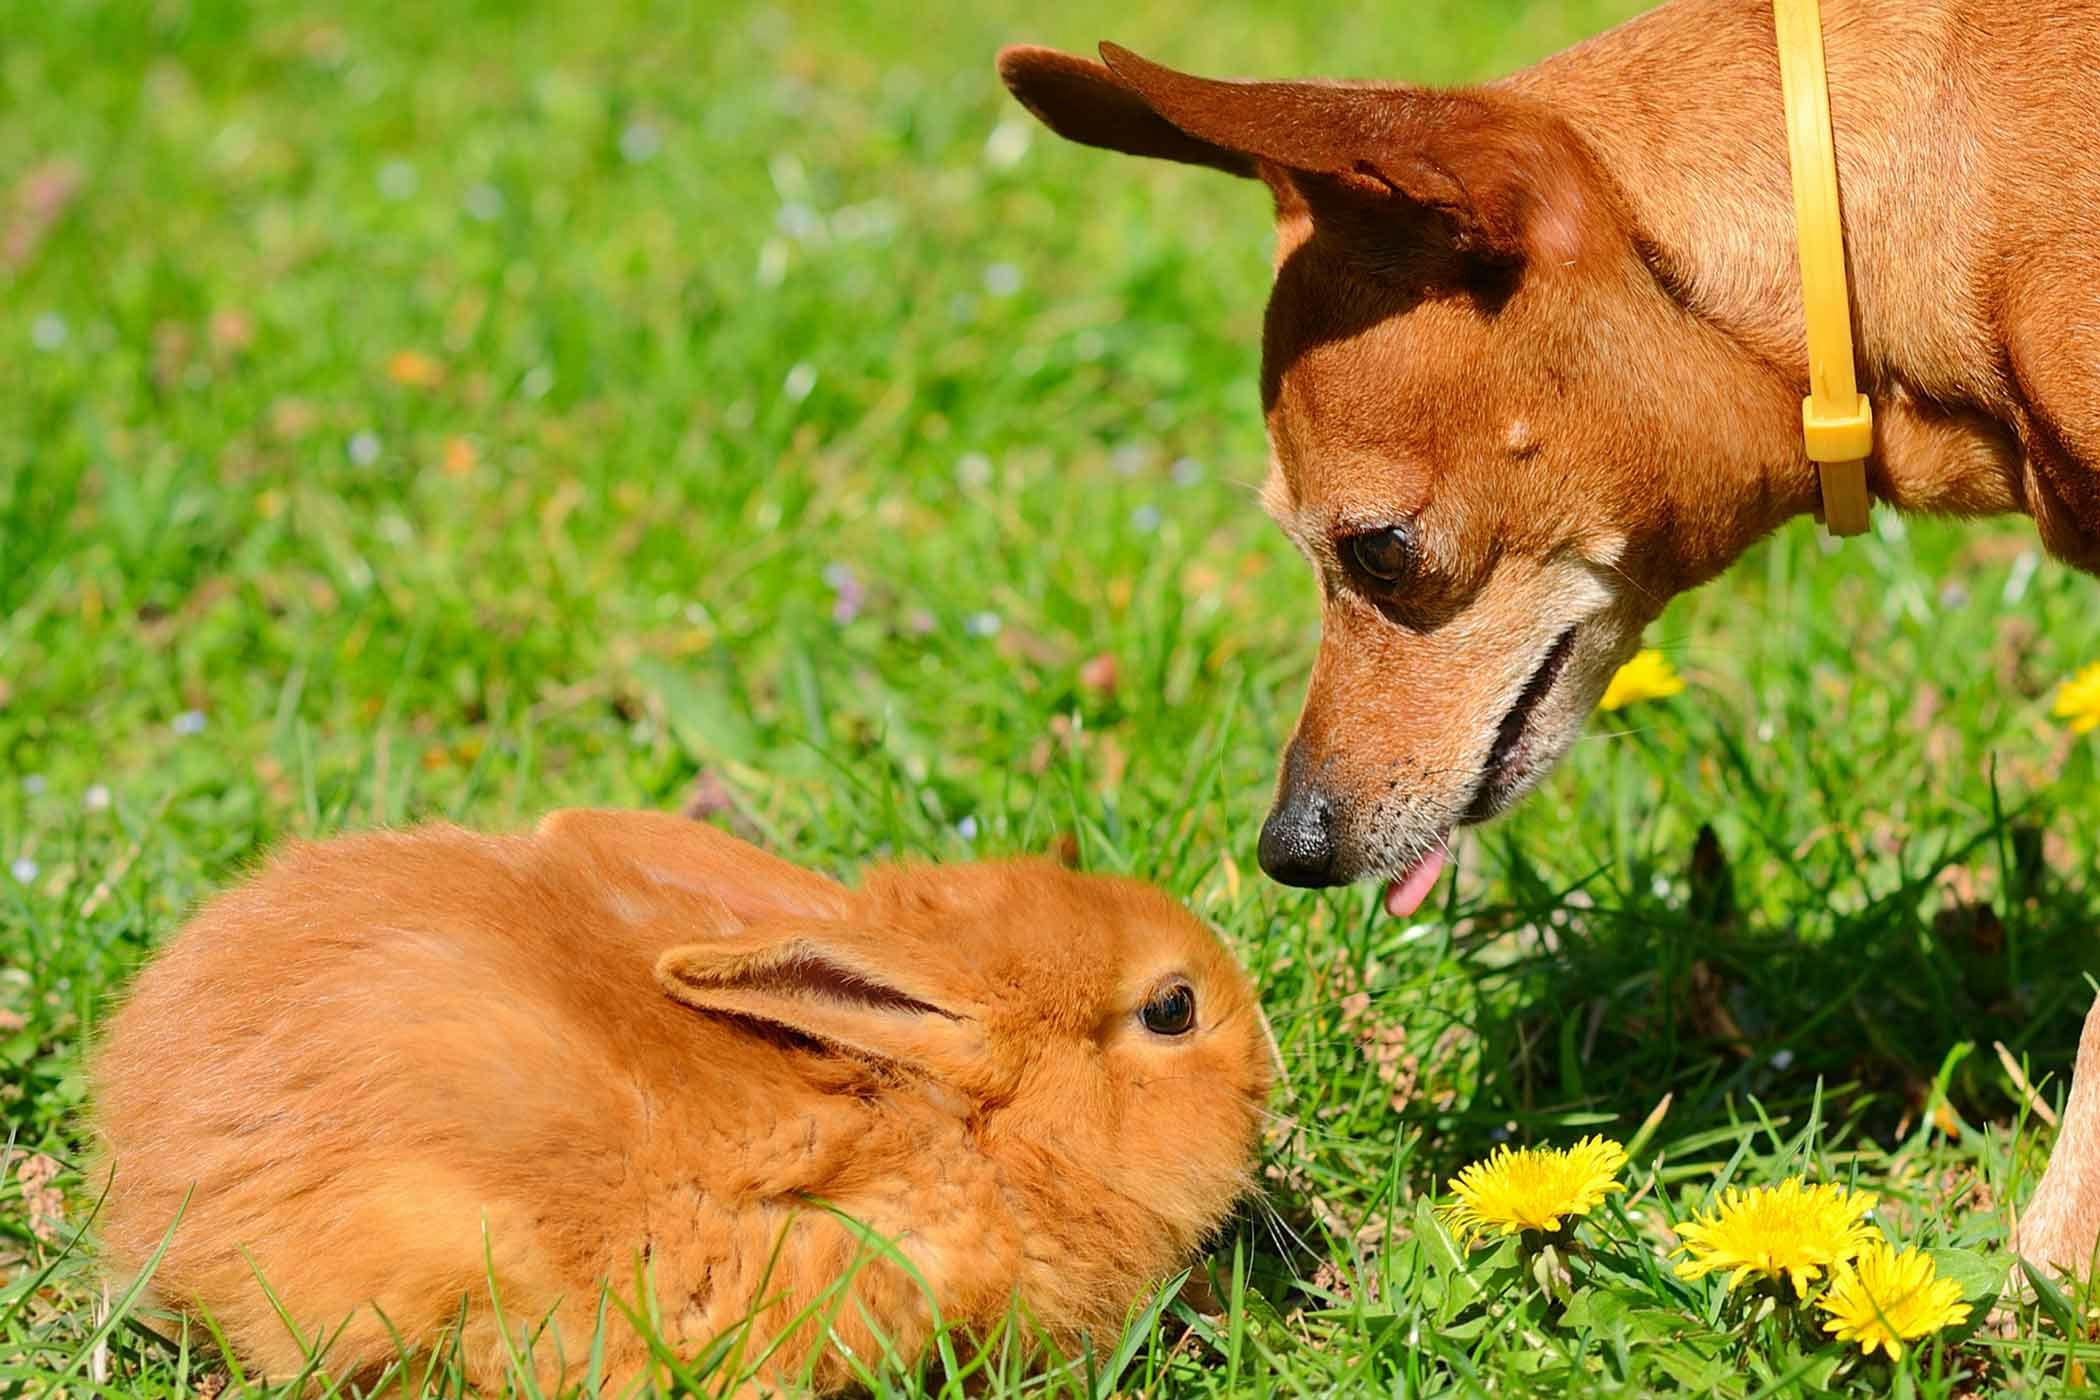 How to Train Your Dog to Not Kill Rabbits | Wag!